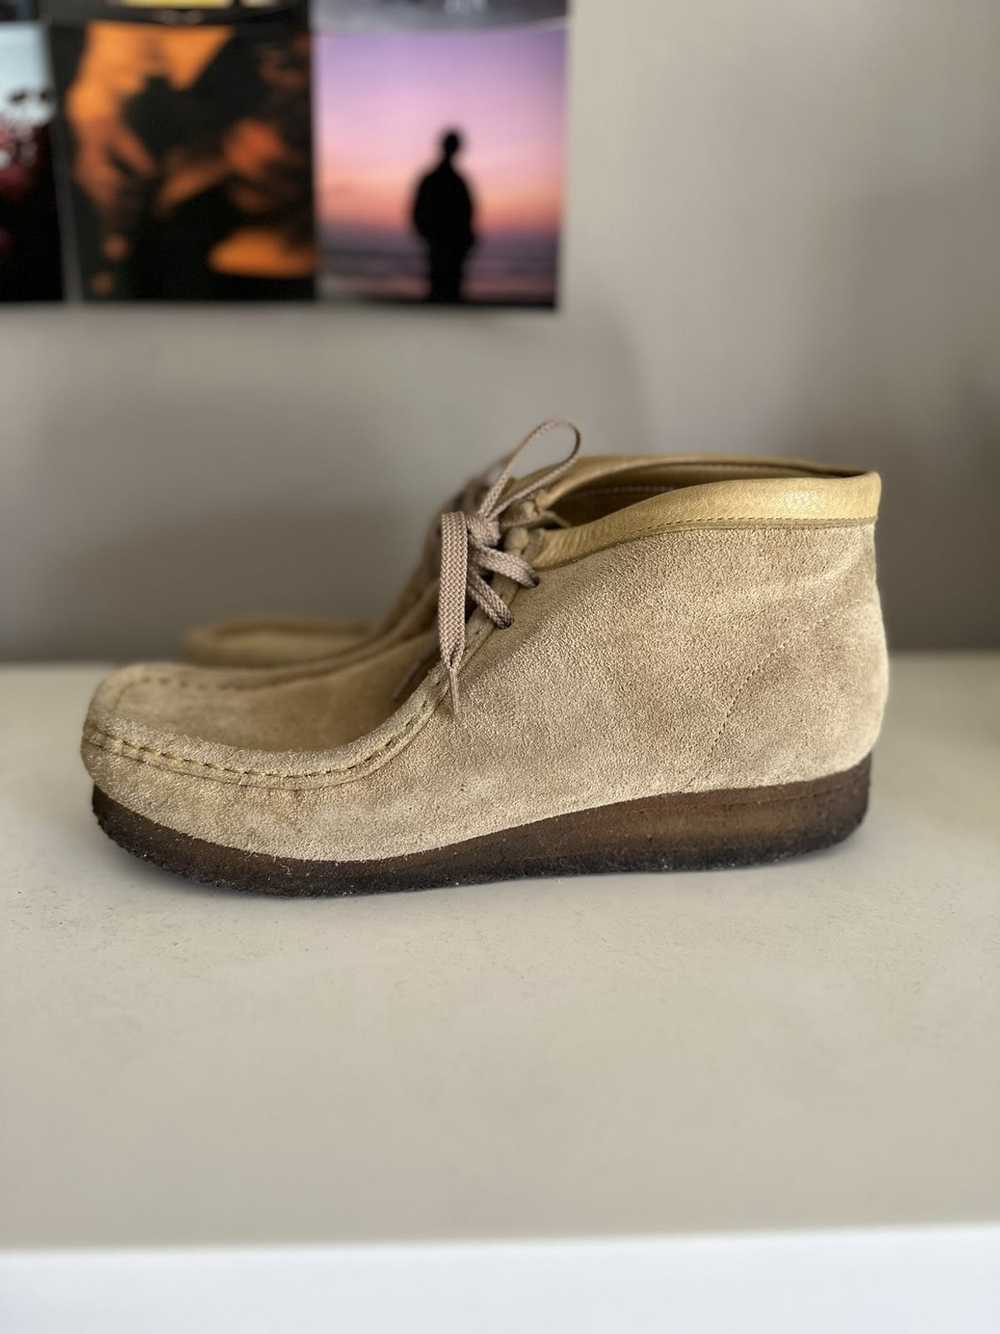 Clarks Clarks Wallabees - image 3